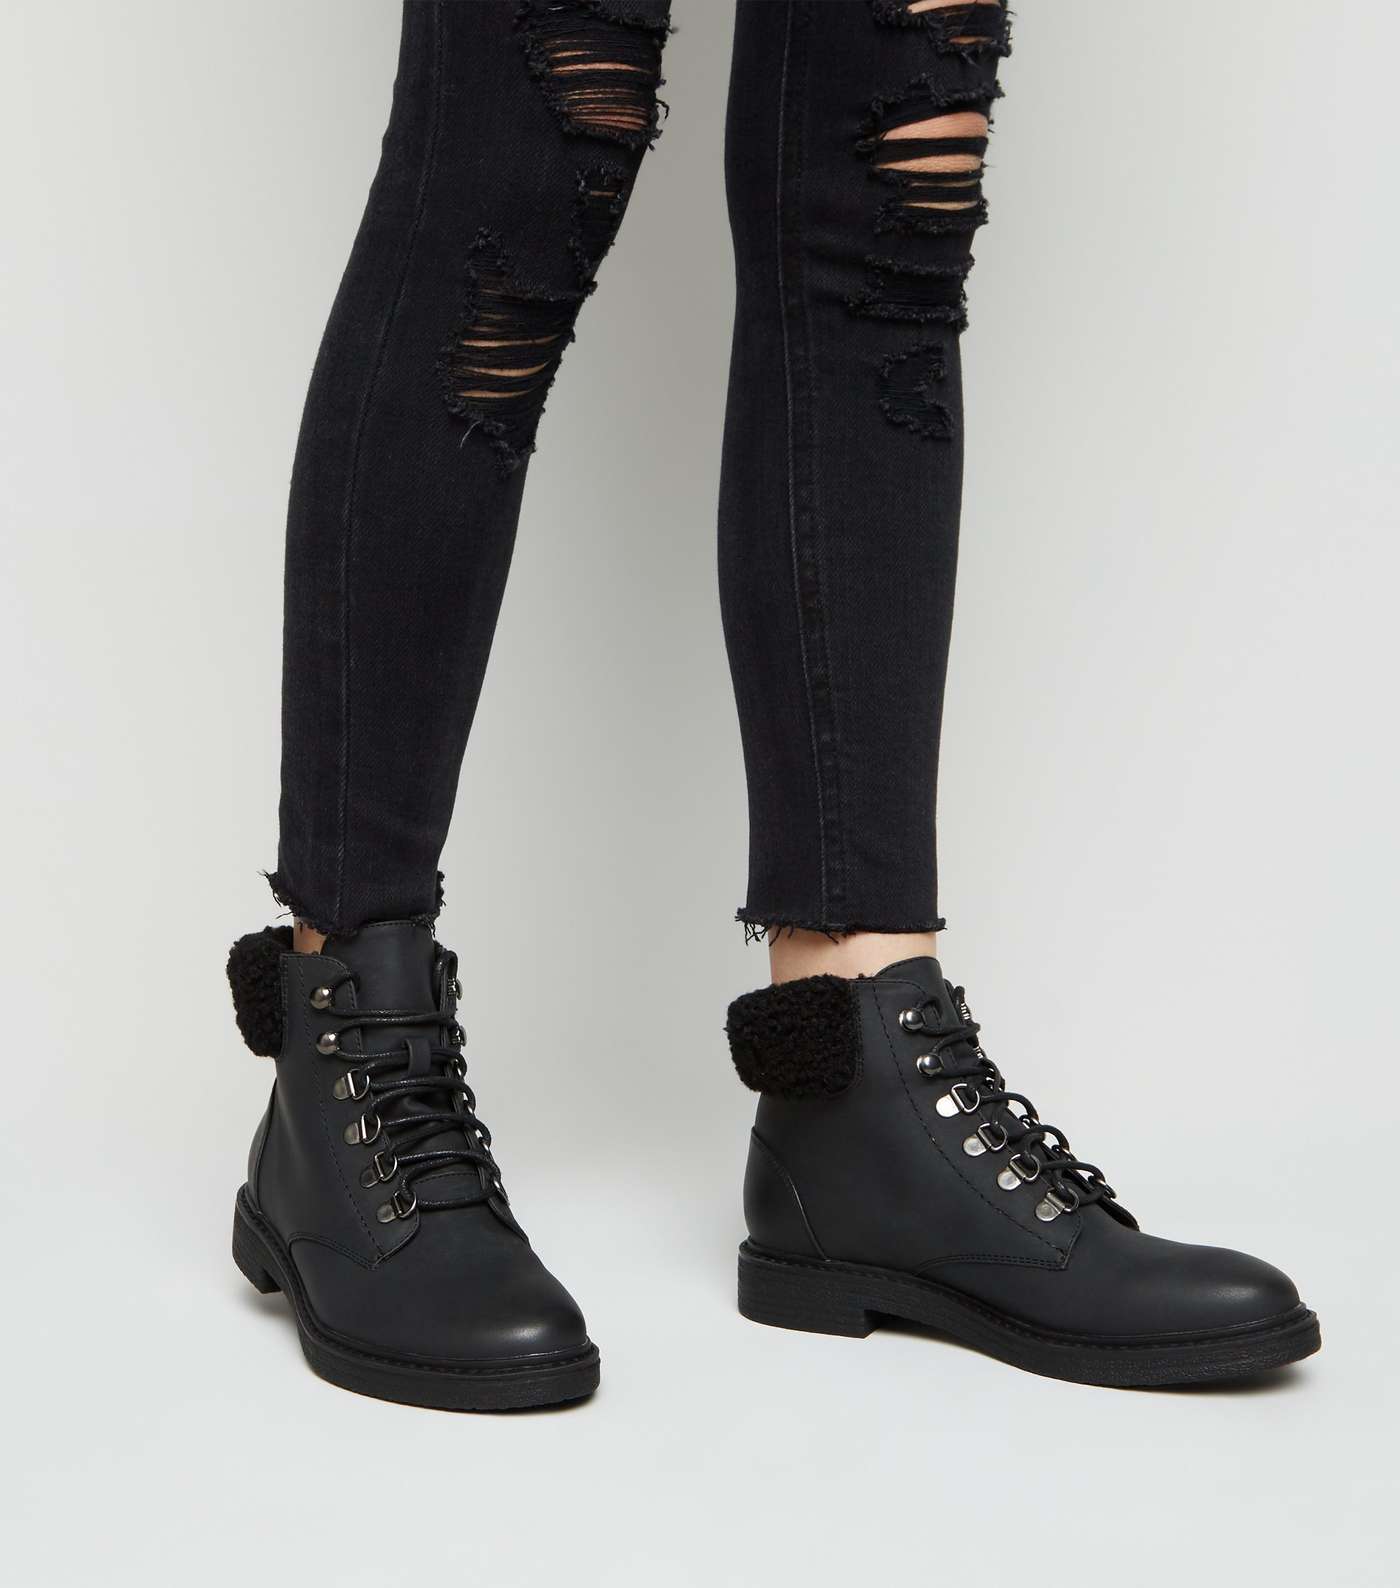 Girls Black Teddy Trim Lace Up Boots Image 2